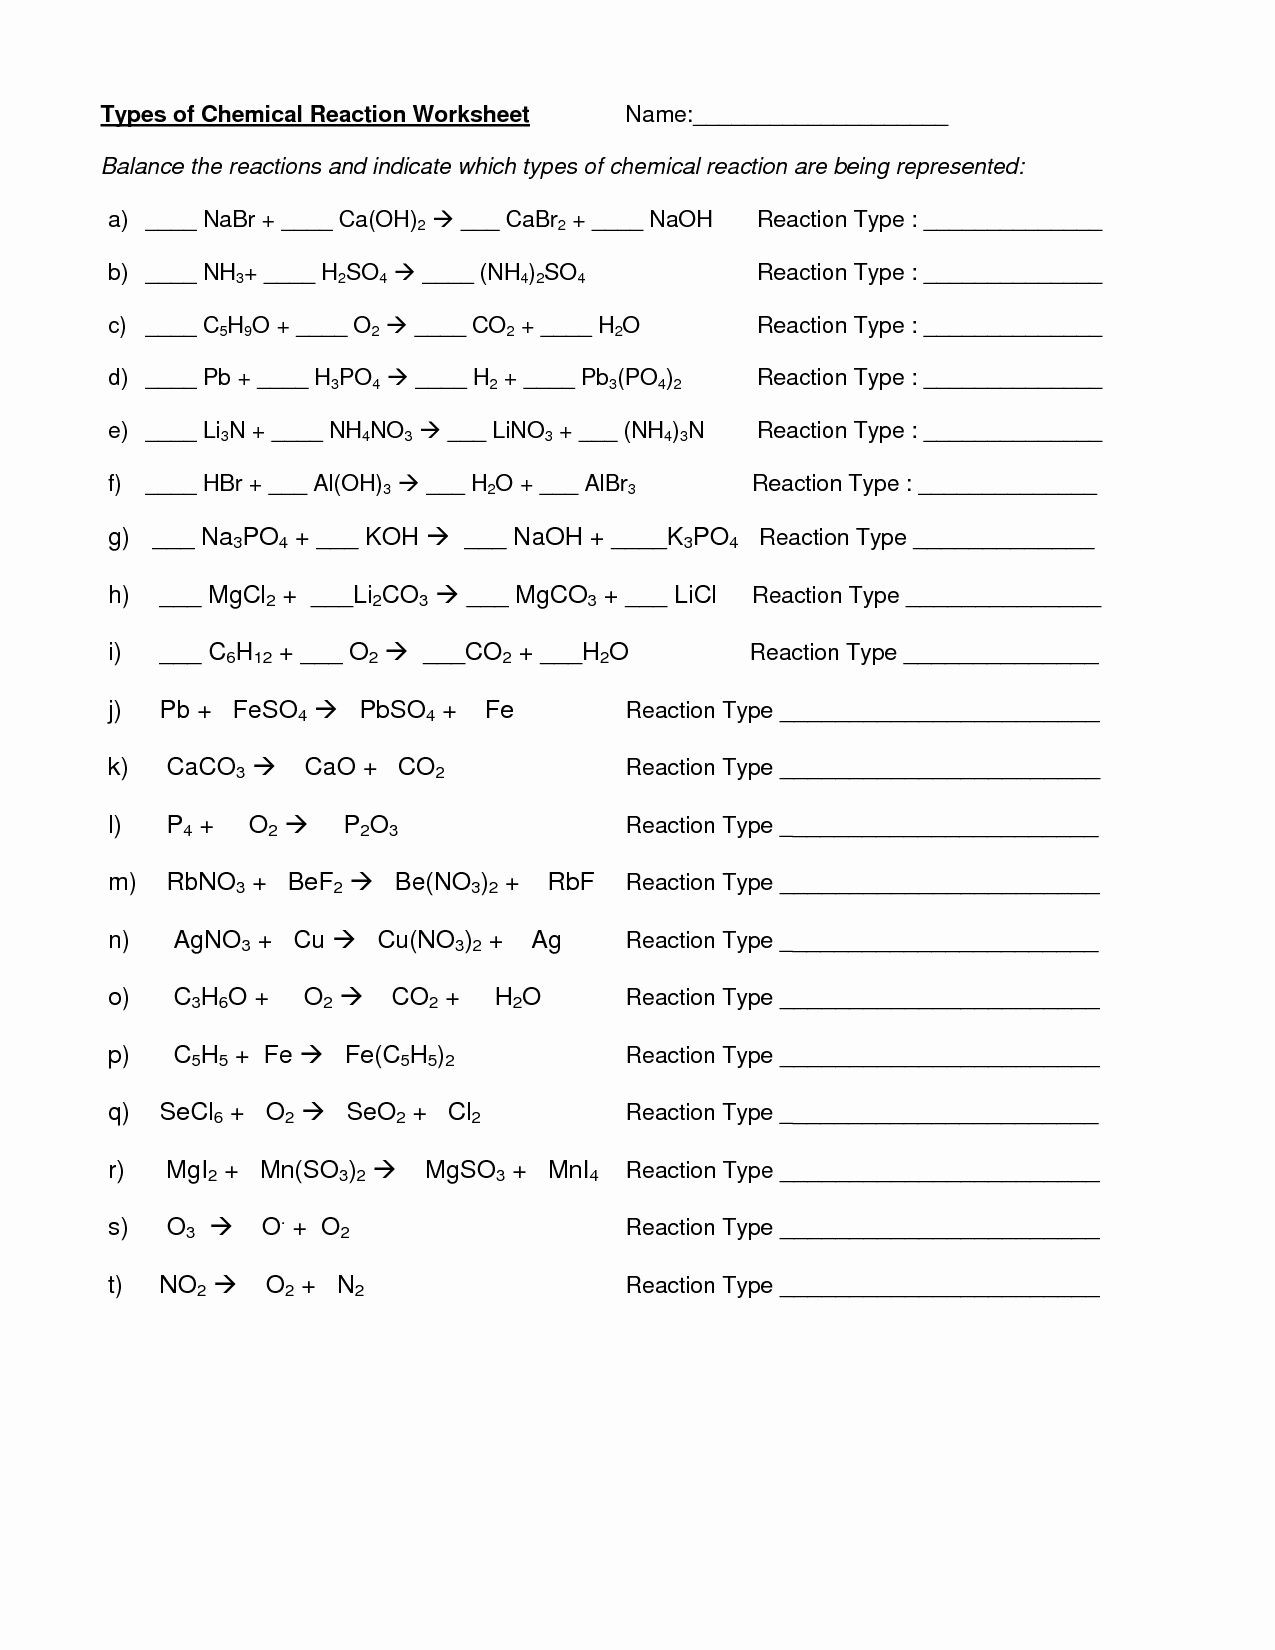 Types Of Reactions Worksheet 50 Classifying Chemical Reactions Worksheet Answers In 2020